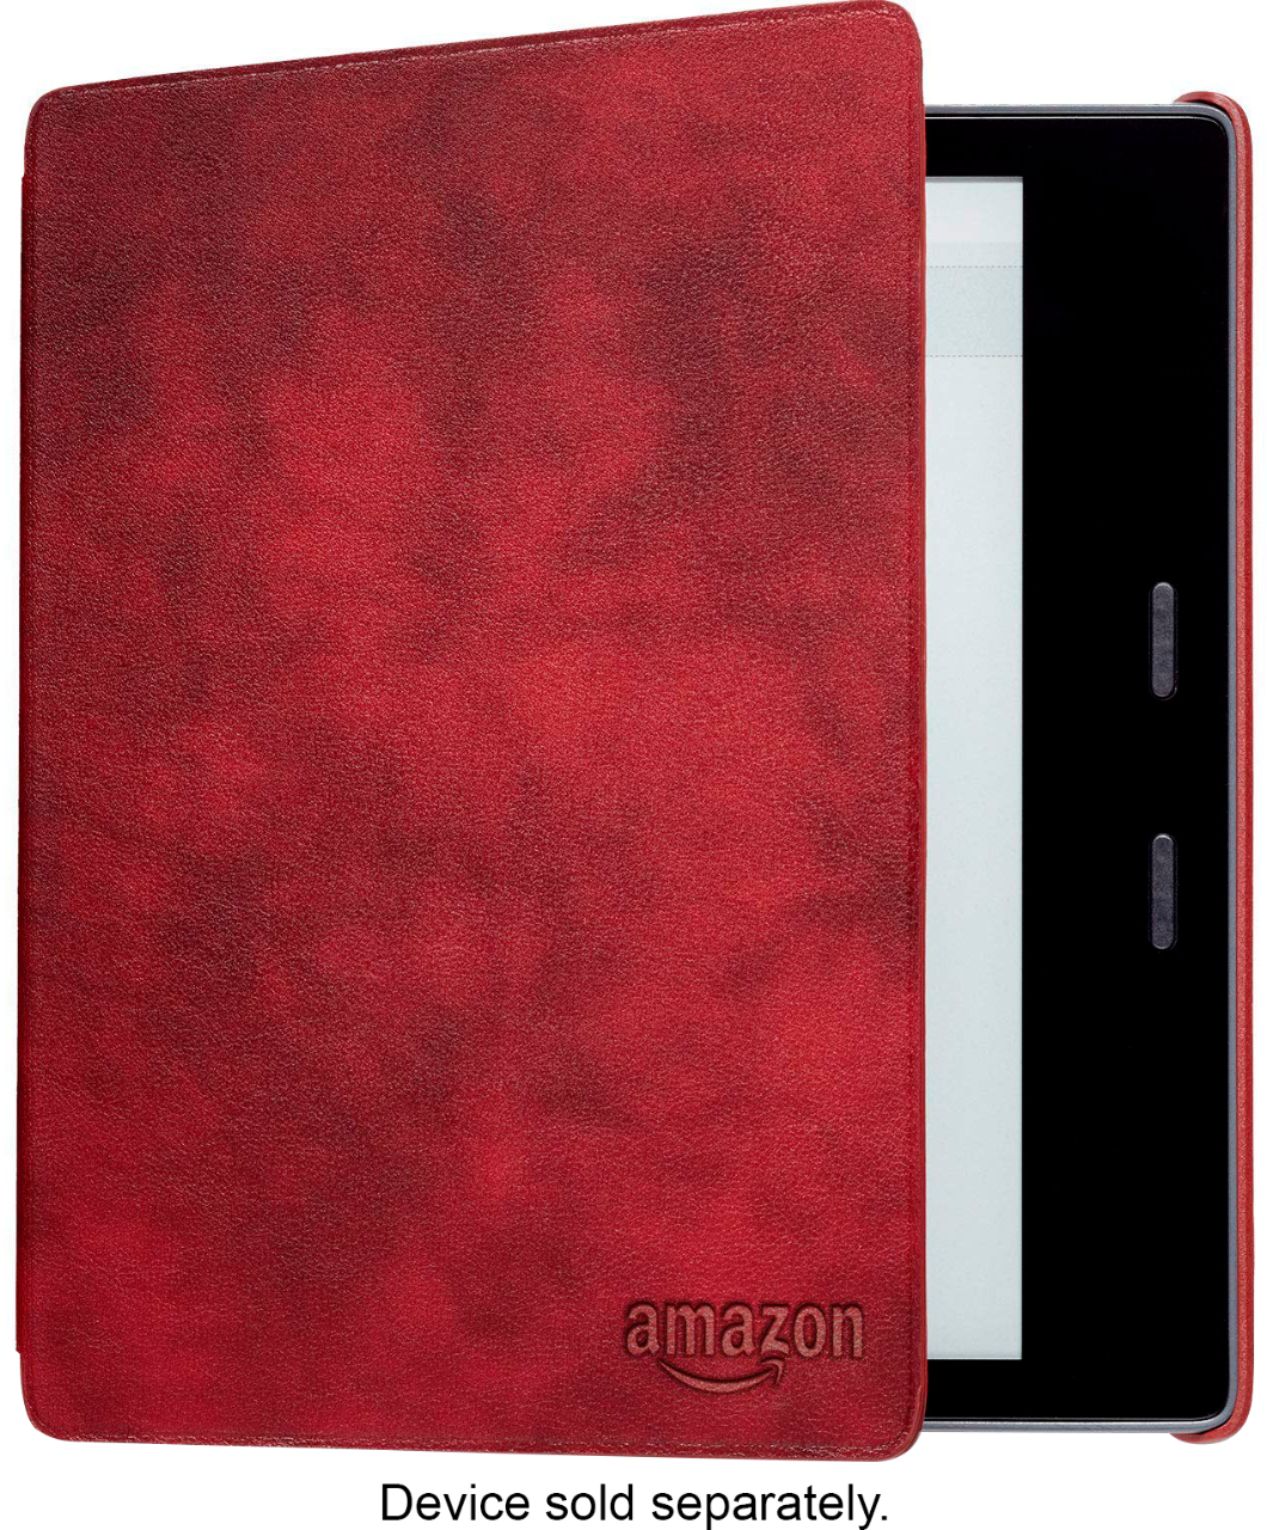 Questions and Answers: Amazon Kindle Oasis Leather Cover Merlot ...